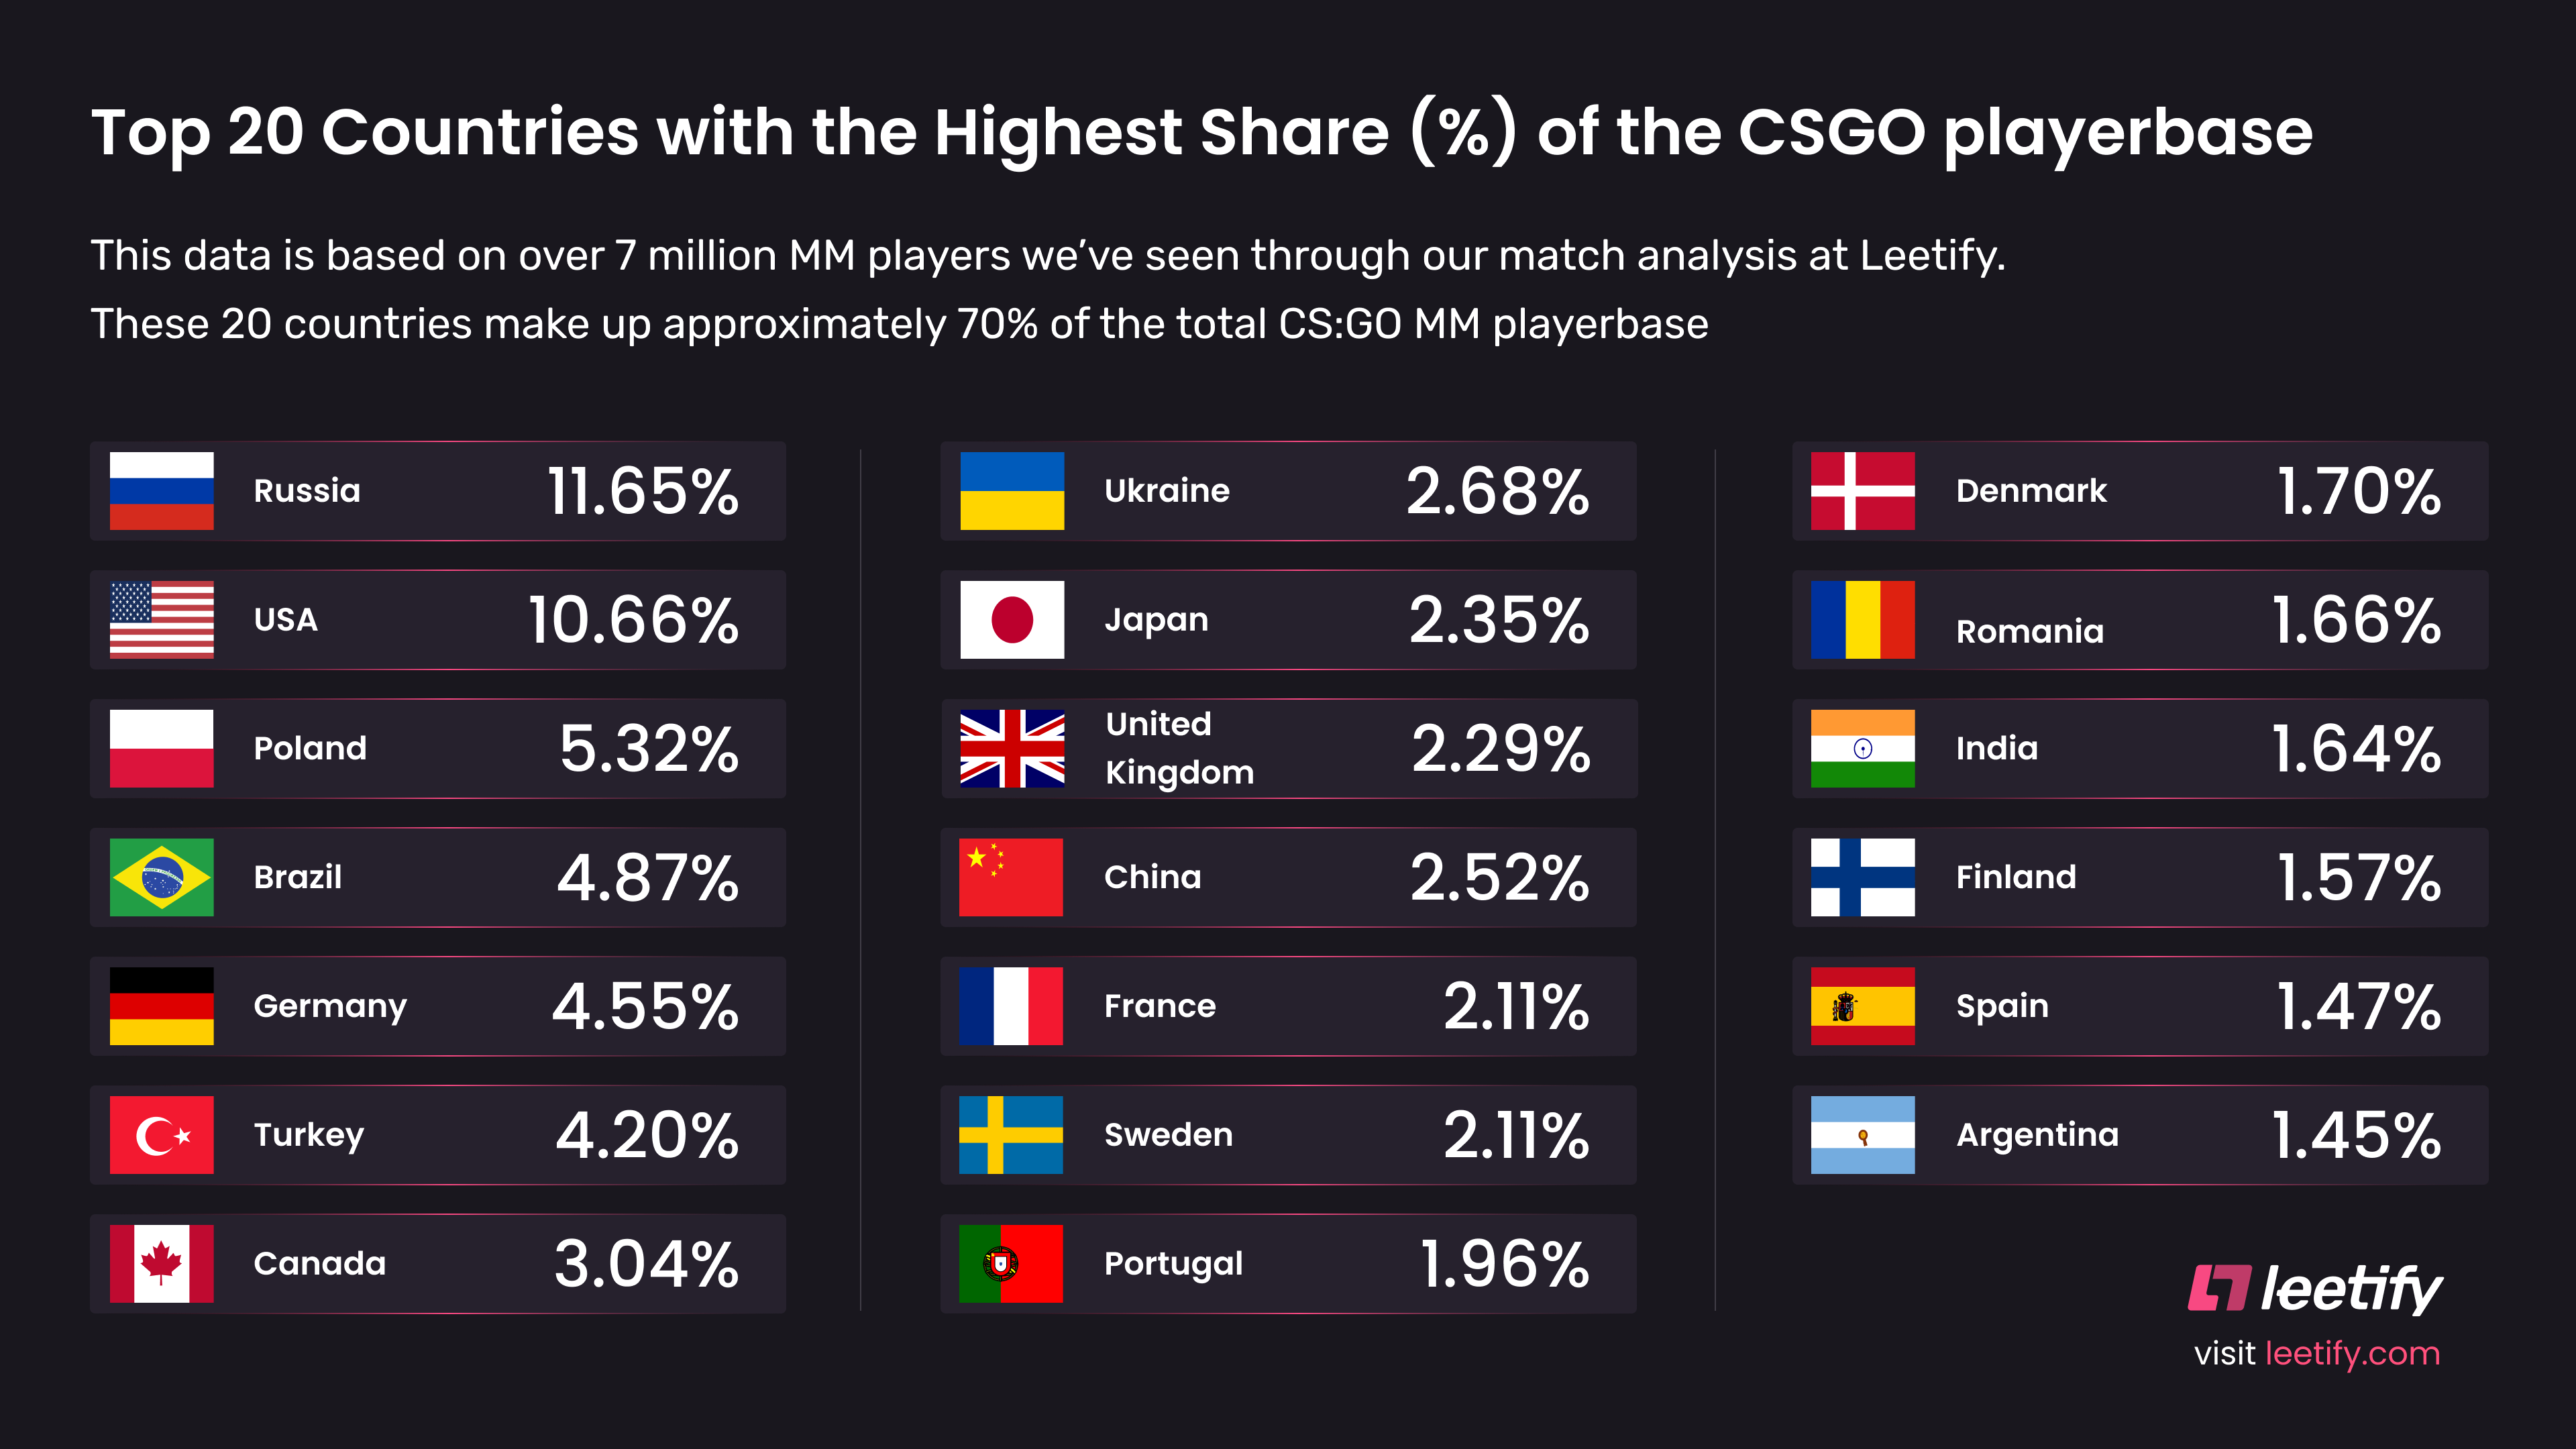 The 20 countries, show here, account for ~70% of the CS:GO player base. 